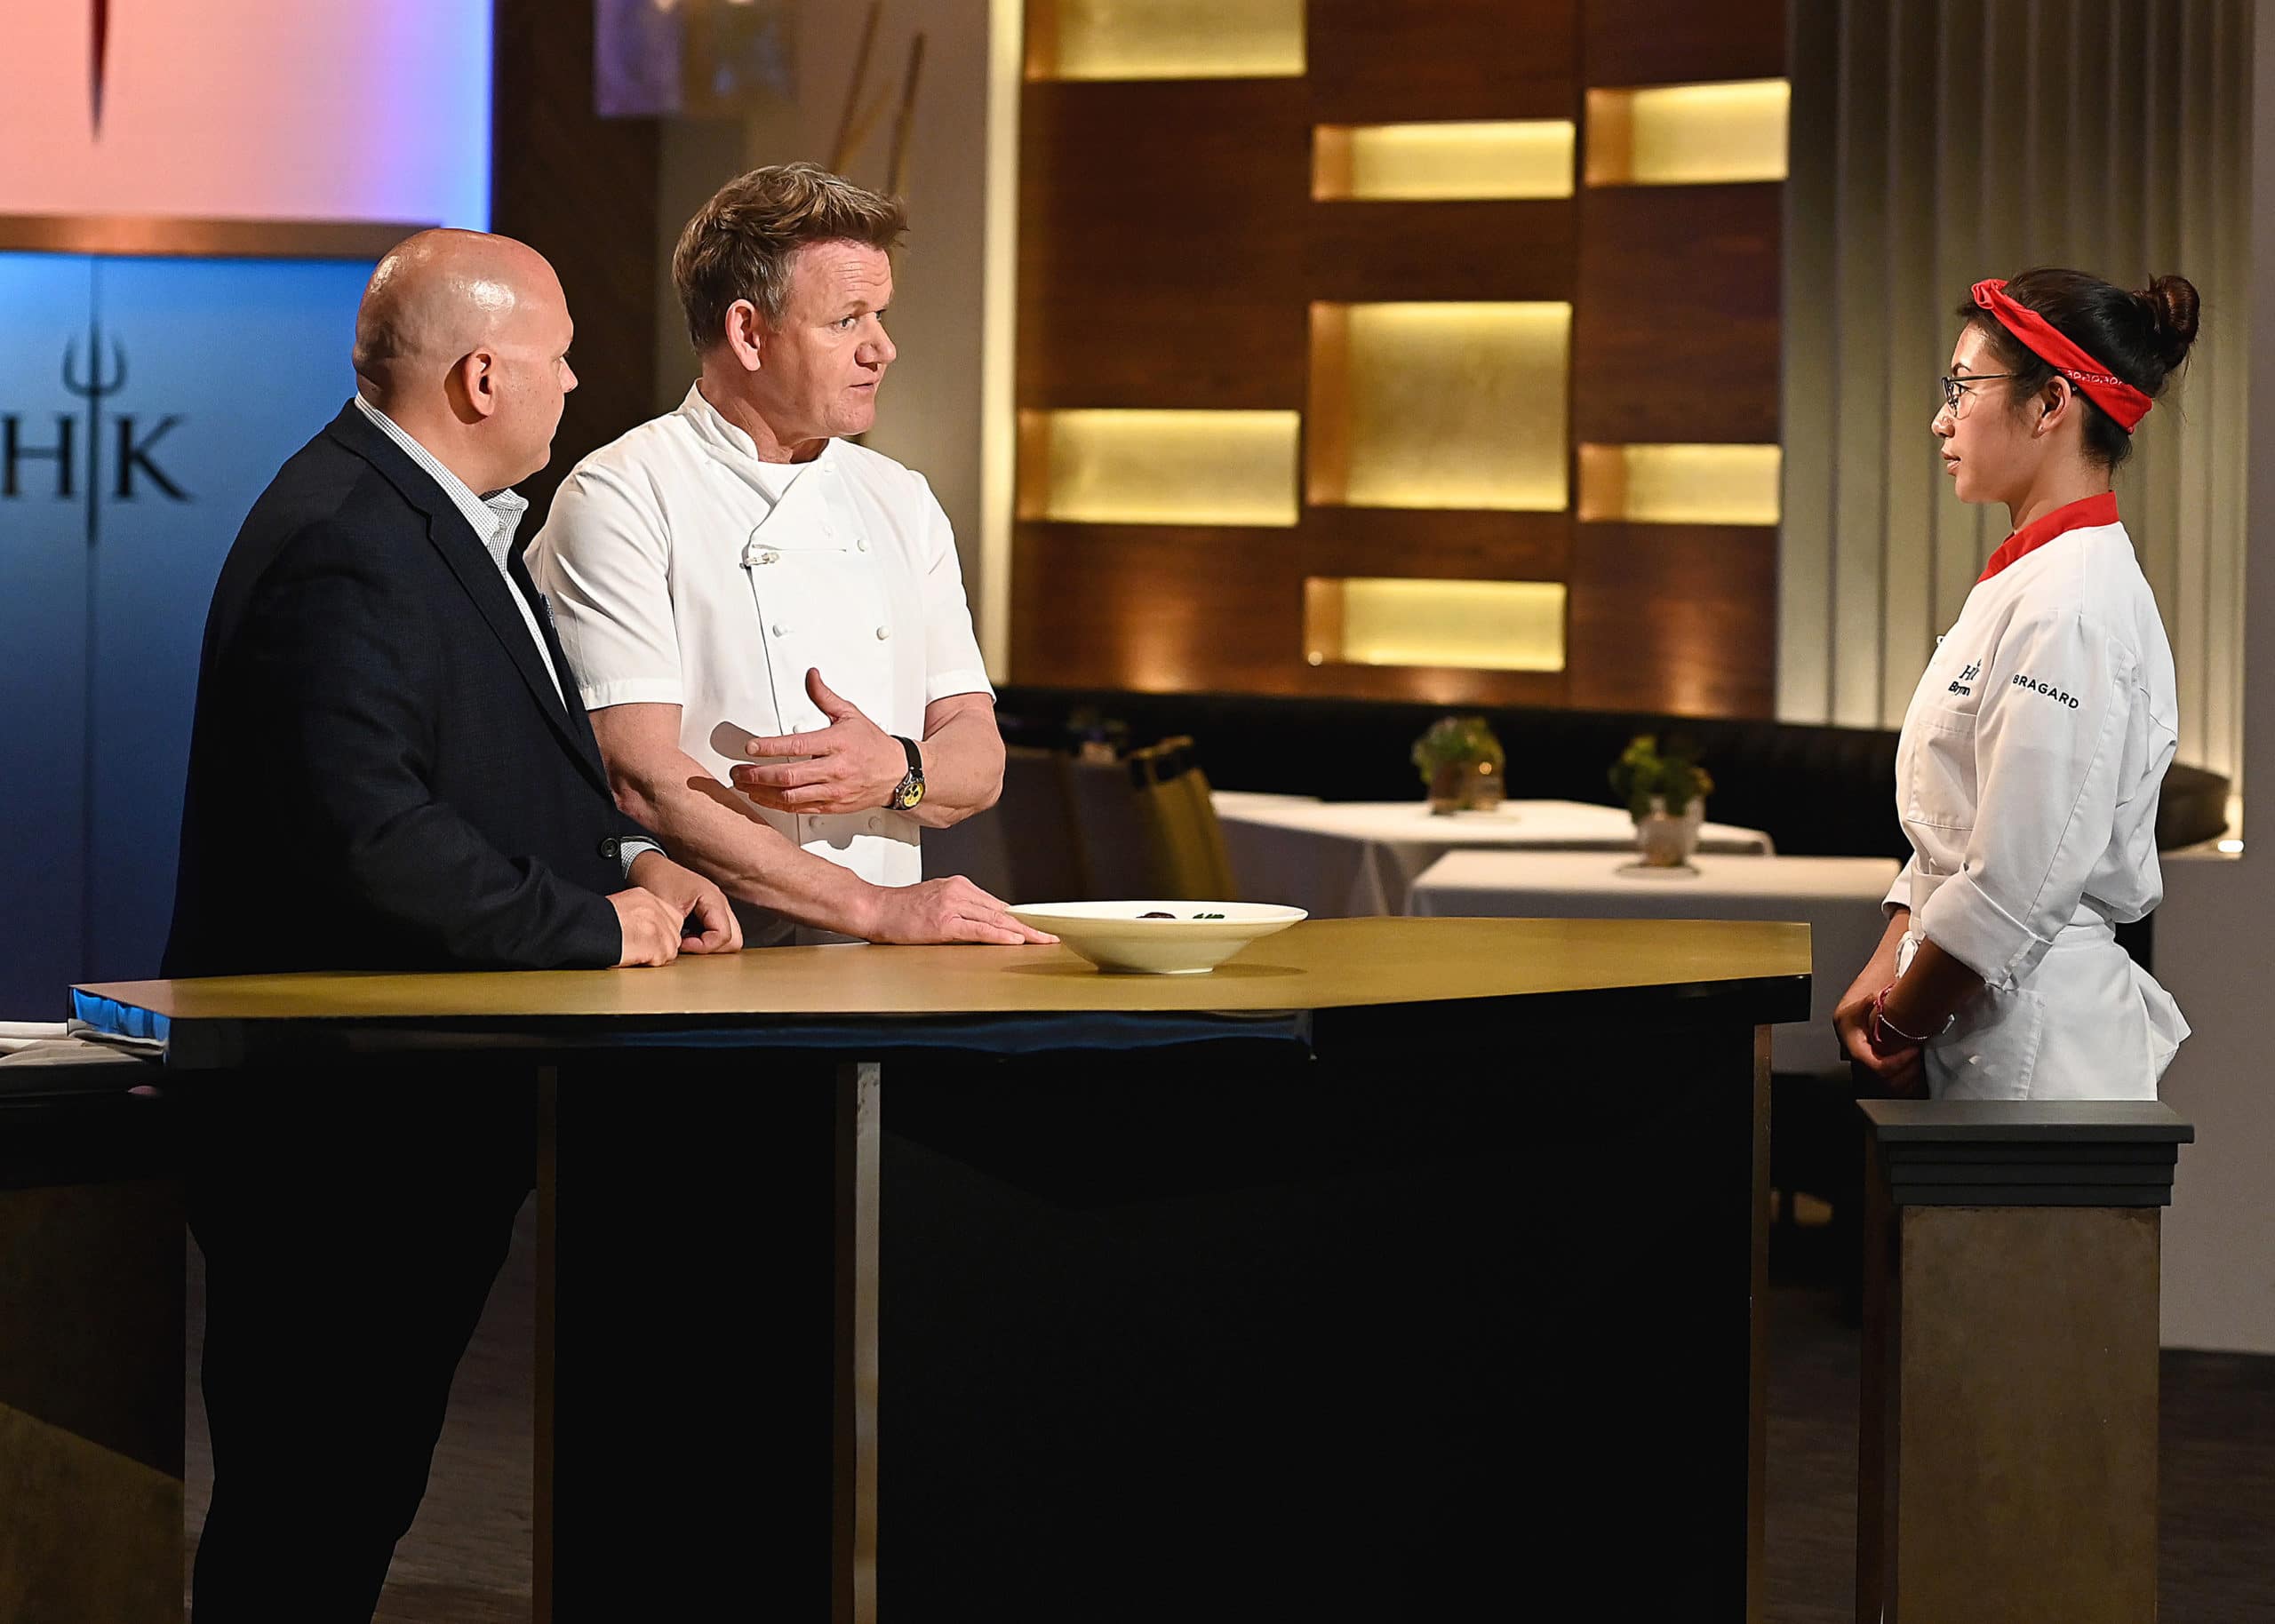 HELL'S KITCHEN: L-R: Guest judge and chef/host Gordon Ramsay with contestant Brynn in the “All Hell Breaks Loose” episode airing Monday, Aug. 30 (8:00-9:01 PM ET/PT) on FOX. CR: Scott Kirkland / FOX. © 2021 FOX MEDIA LLC.